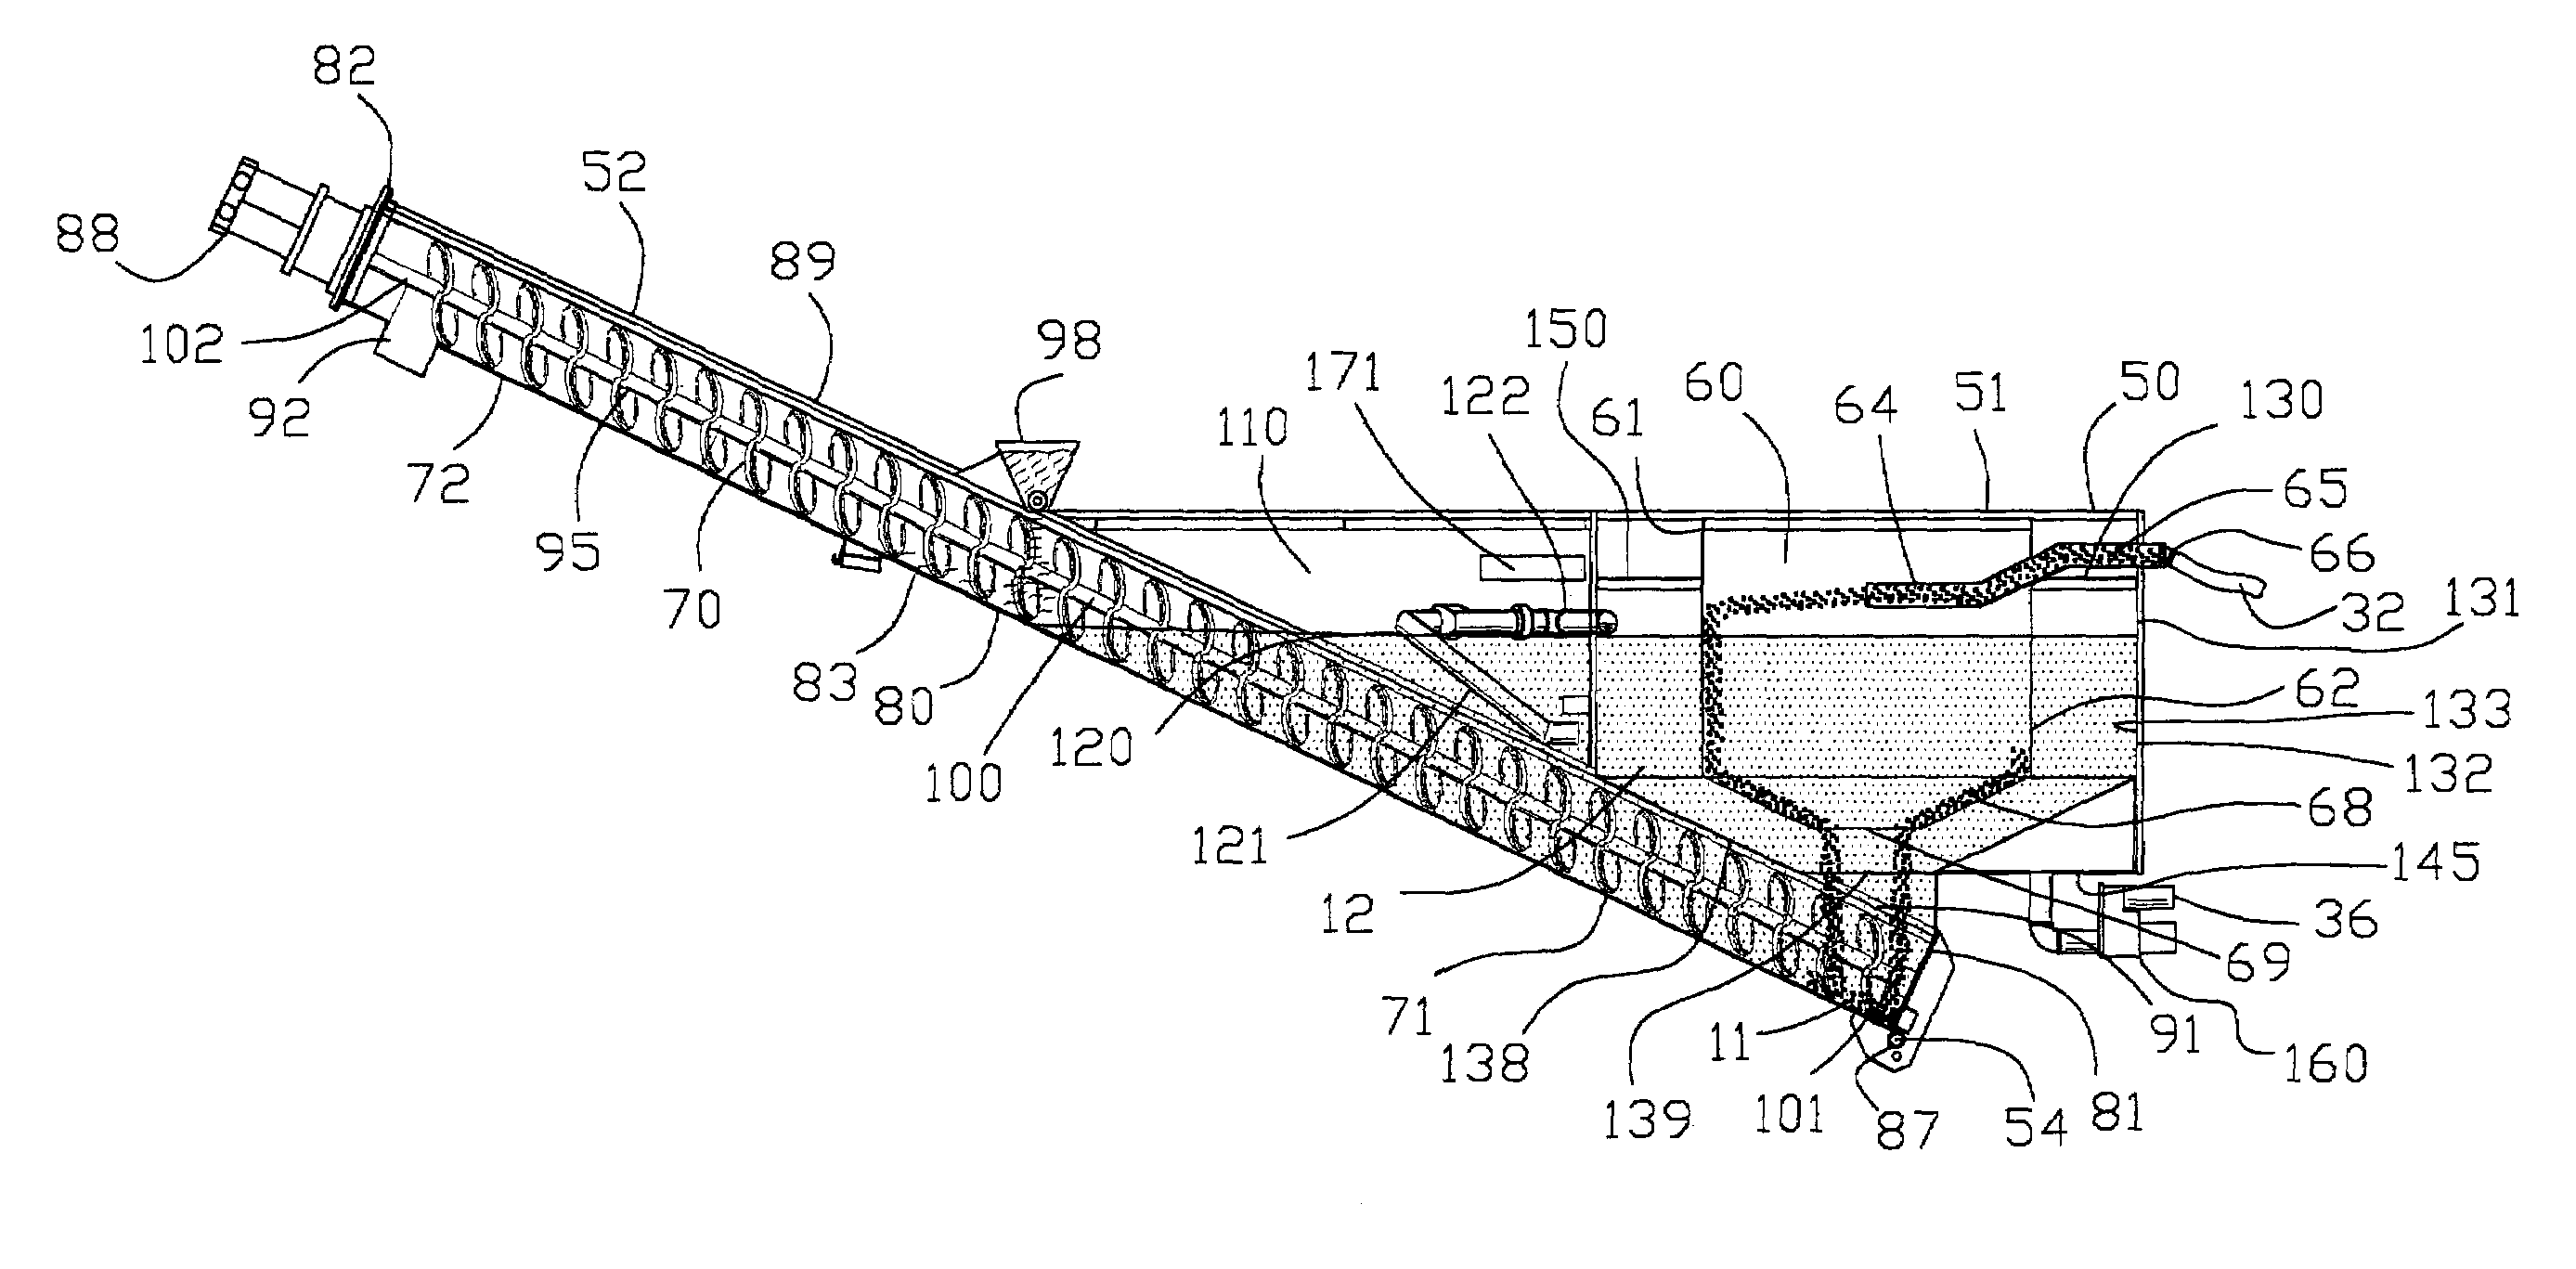 Apparatus for separating solids from a liquid